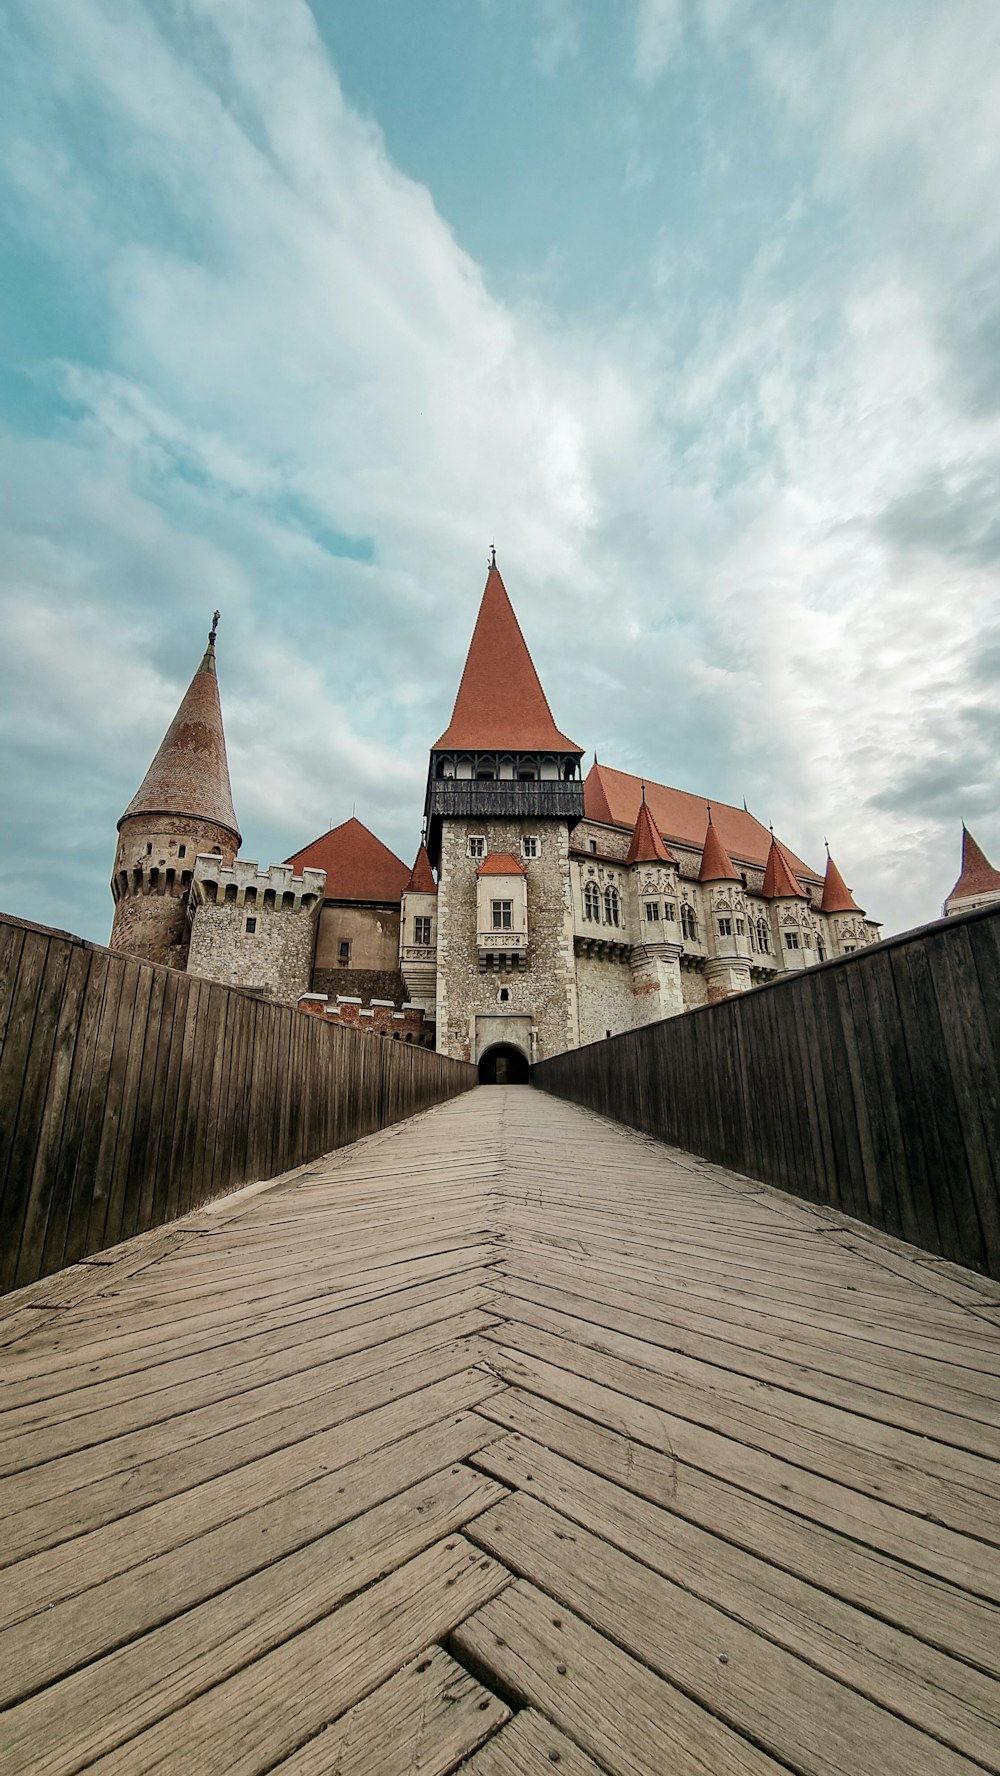 a wooden walkway leading to a castle like building